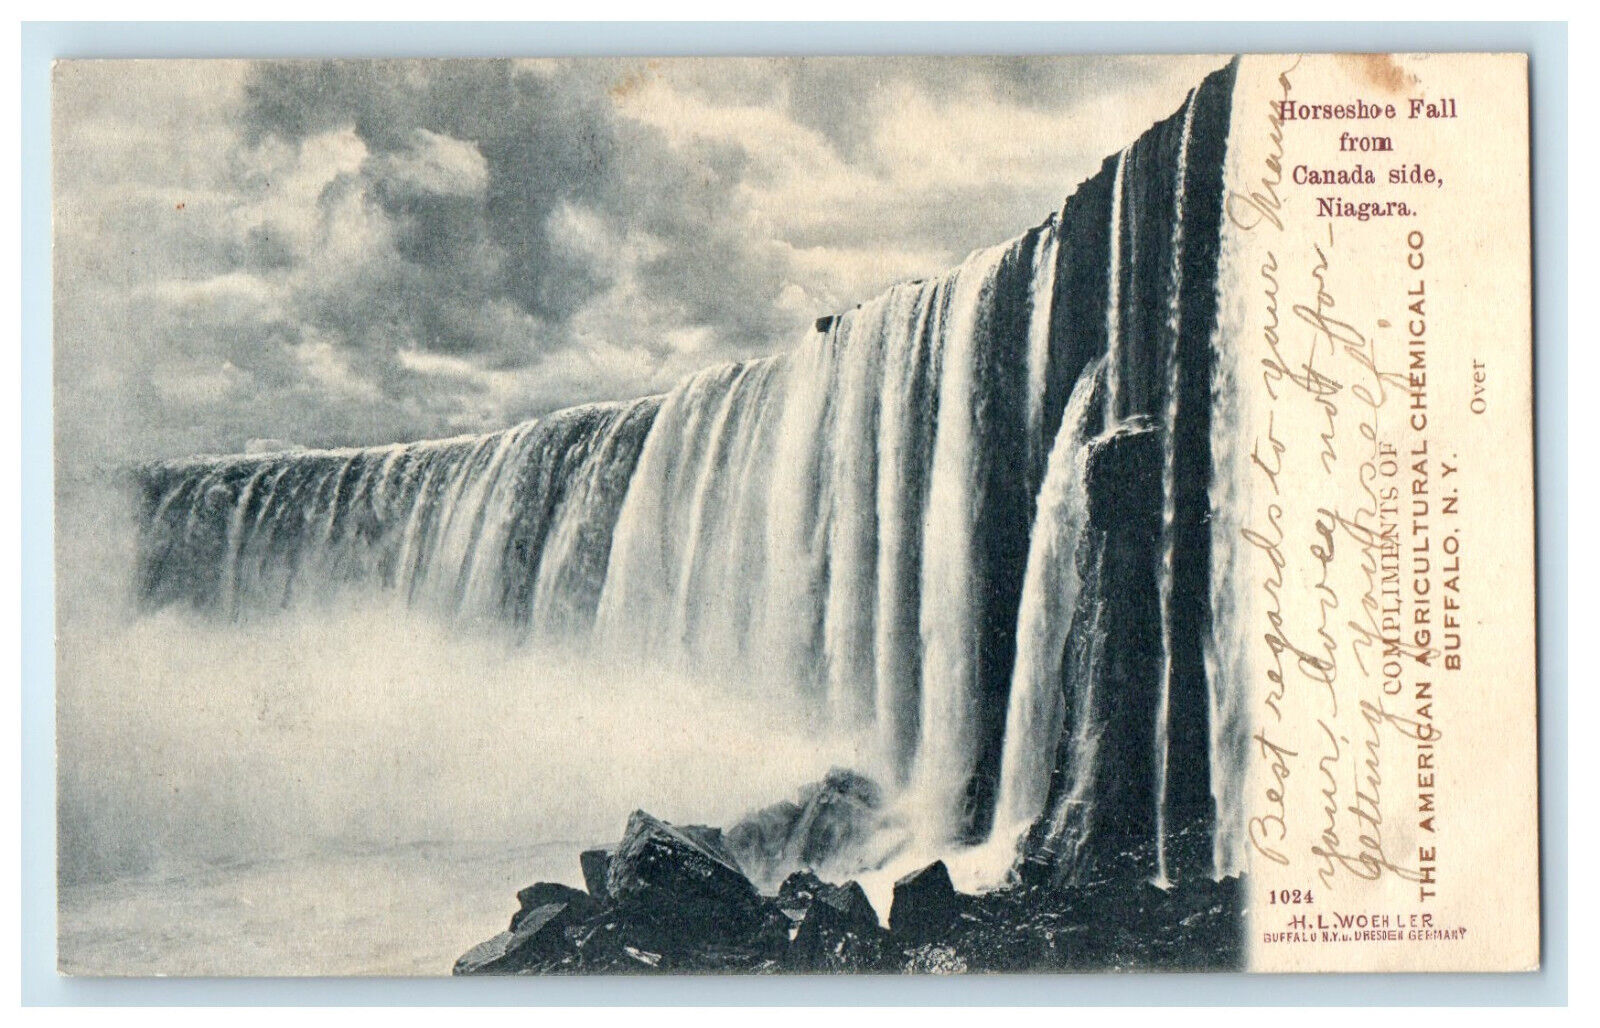 1908 Horseshoe Fall American Agricultural Chemical Co Canada Postcard